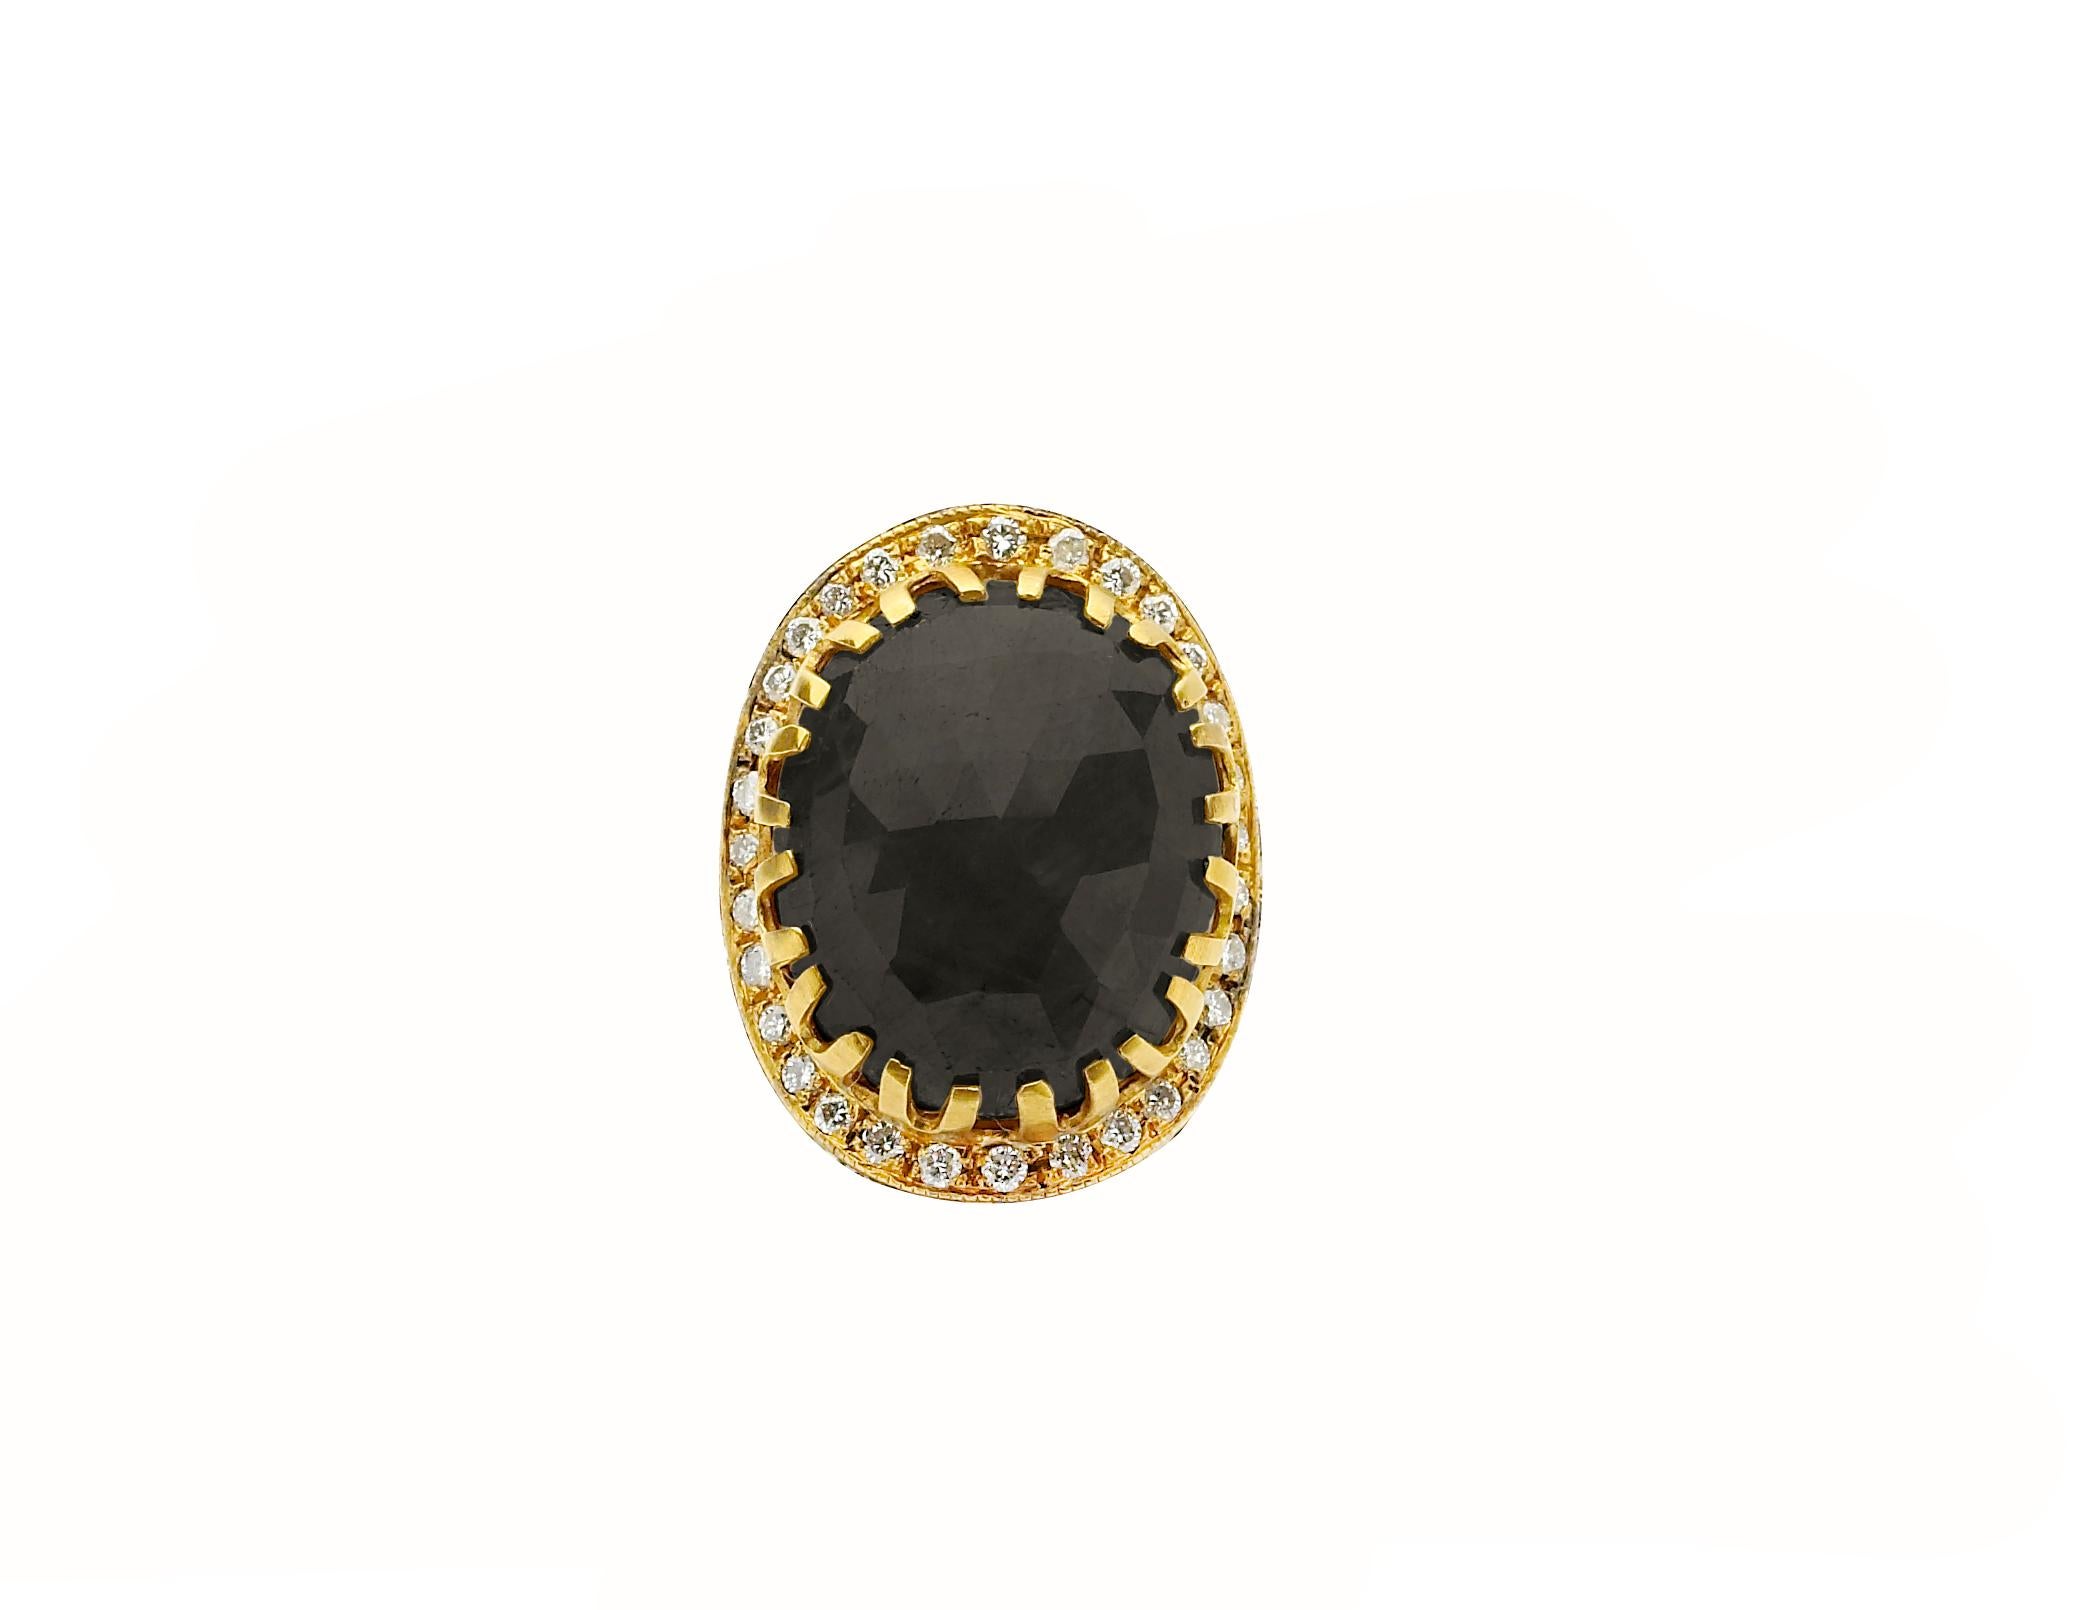 Faceted Chocolate Sapphire 9.89cts with 18K yellow gold and pave diamonds 0.80cts. Size 6.75.

Chocolate Sapphire is a brown variety of sapphire. Smooth, warm and satisfying, this stone is a fun way to introduce a surprising neutral tone in your